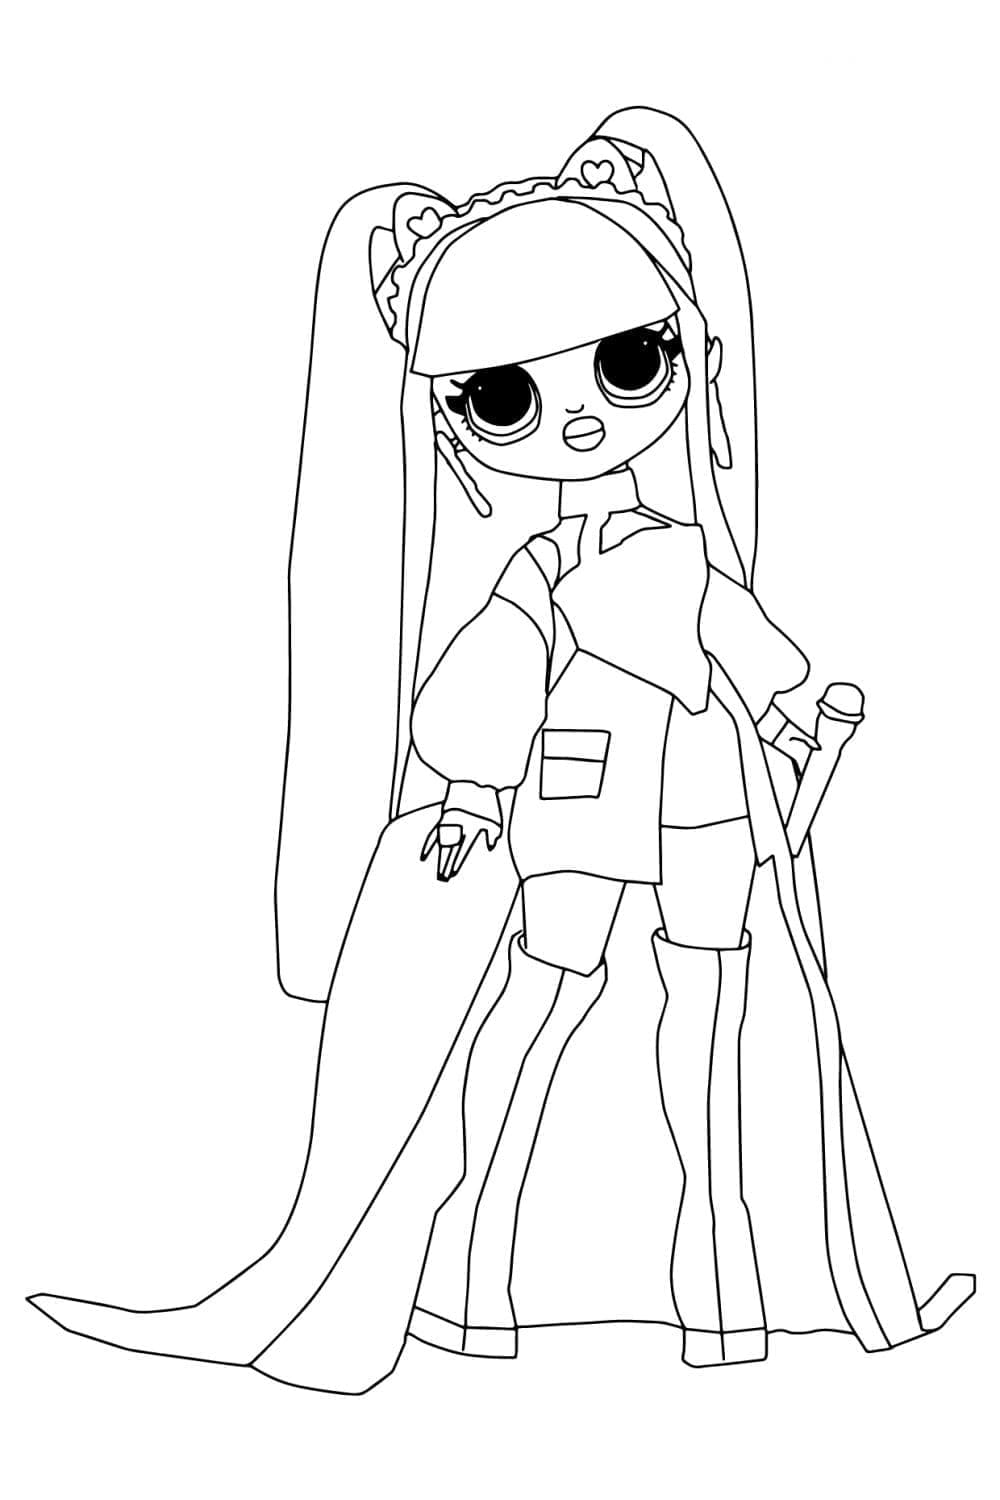 Kitty K LOL Surprise OMG coloring page